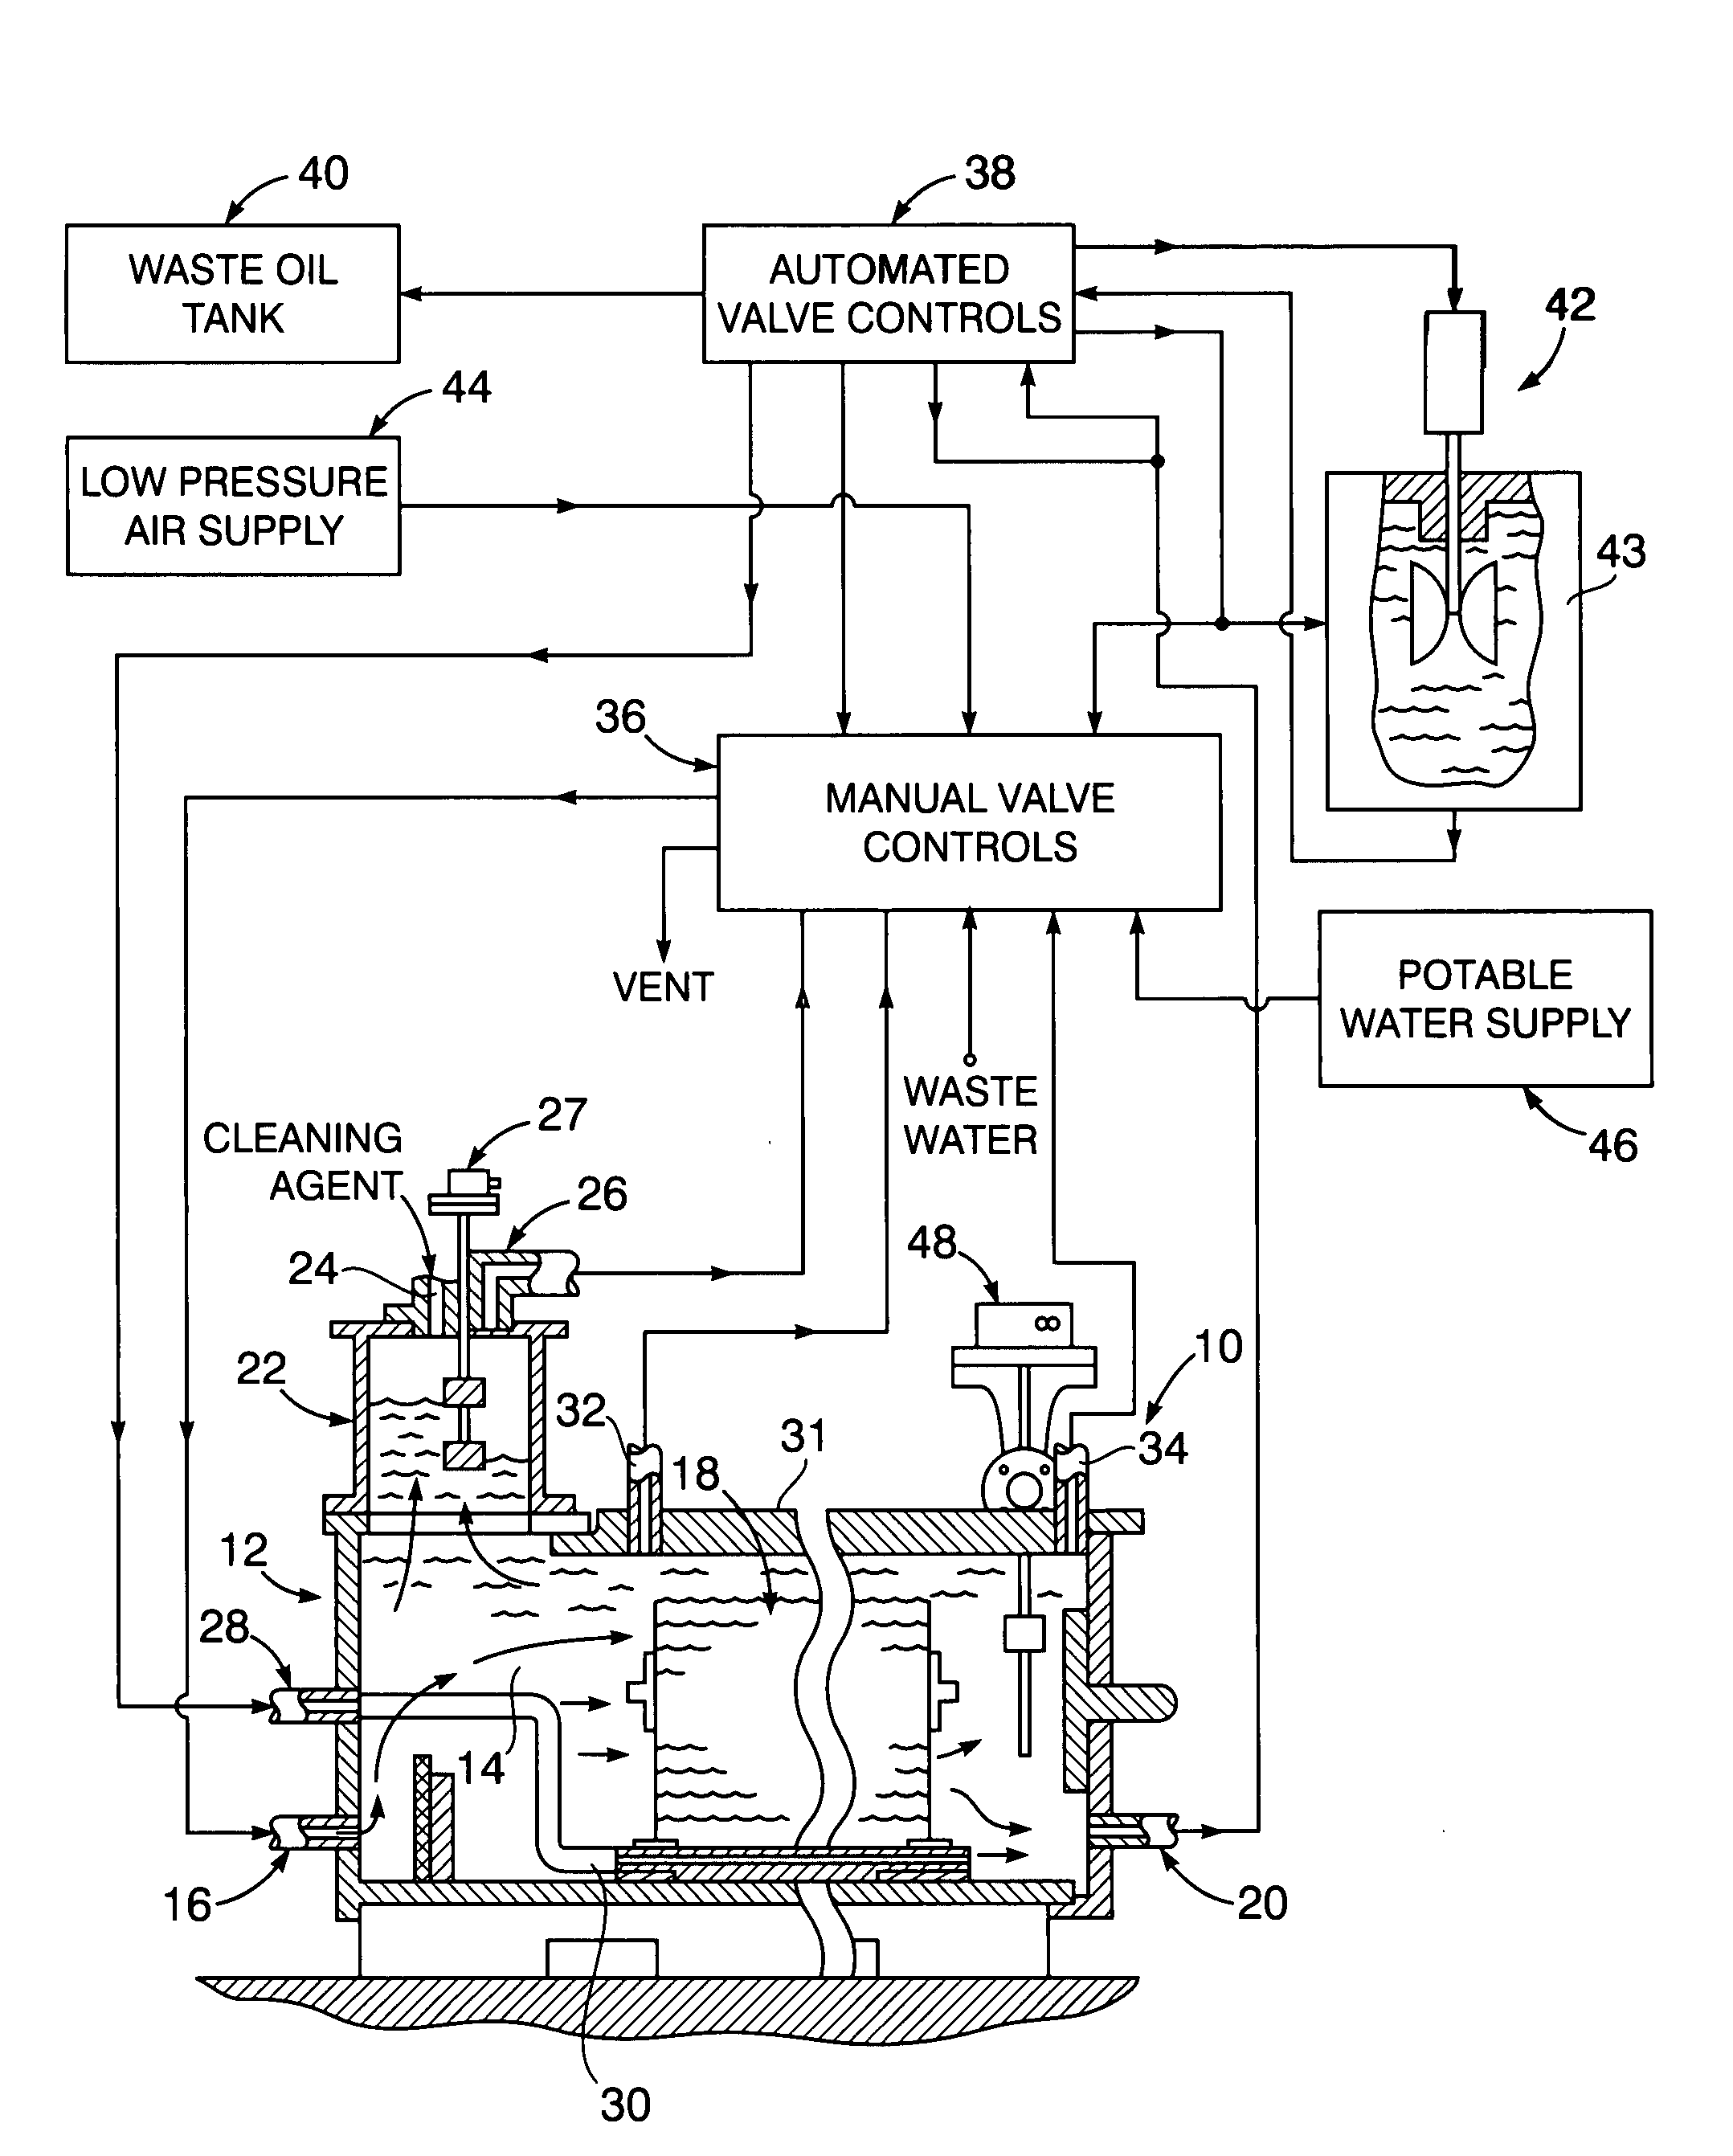 Valve automated in-situ cleaning system for oil water separator